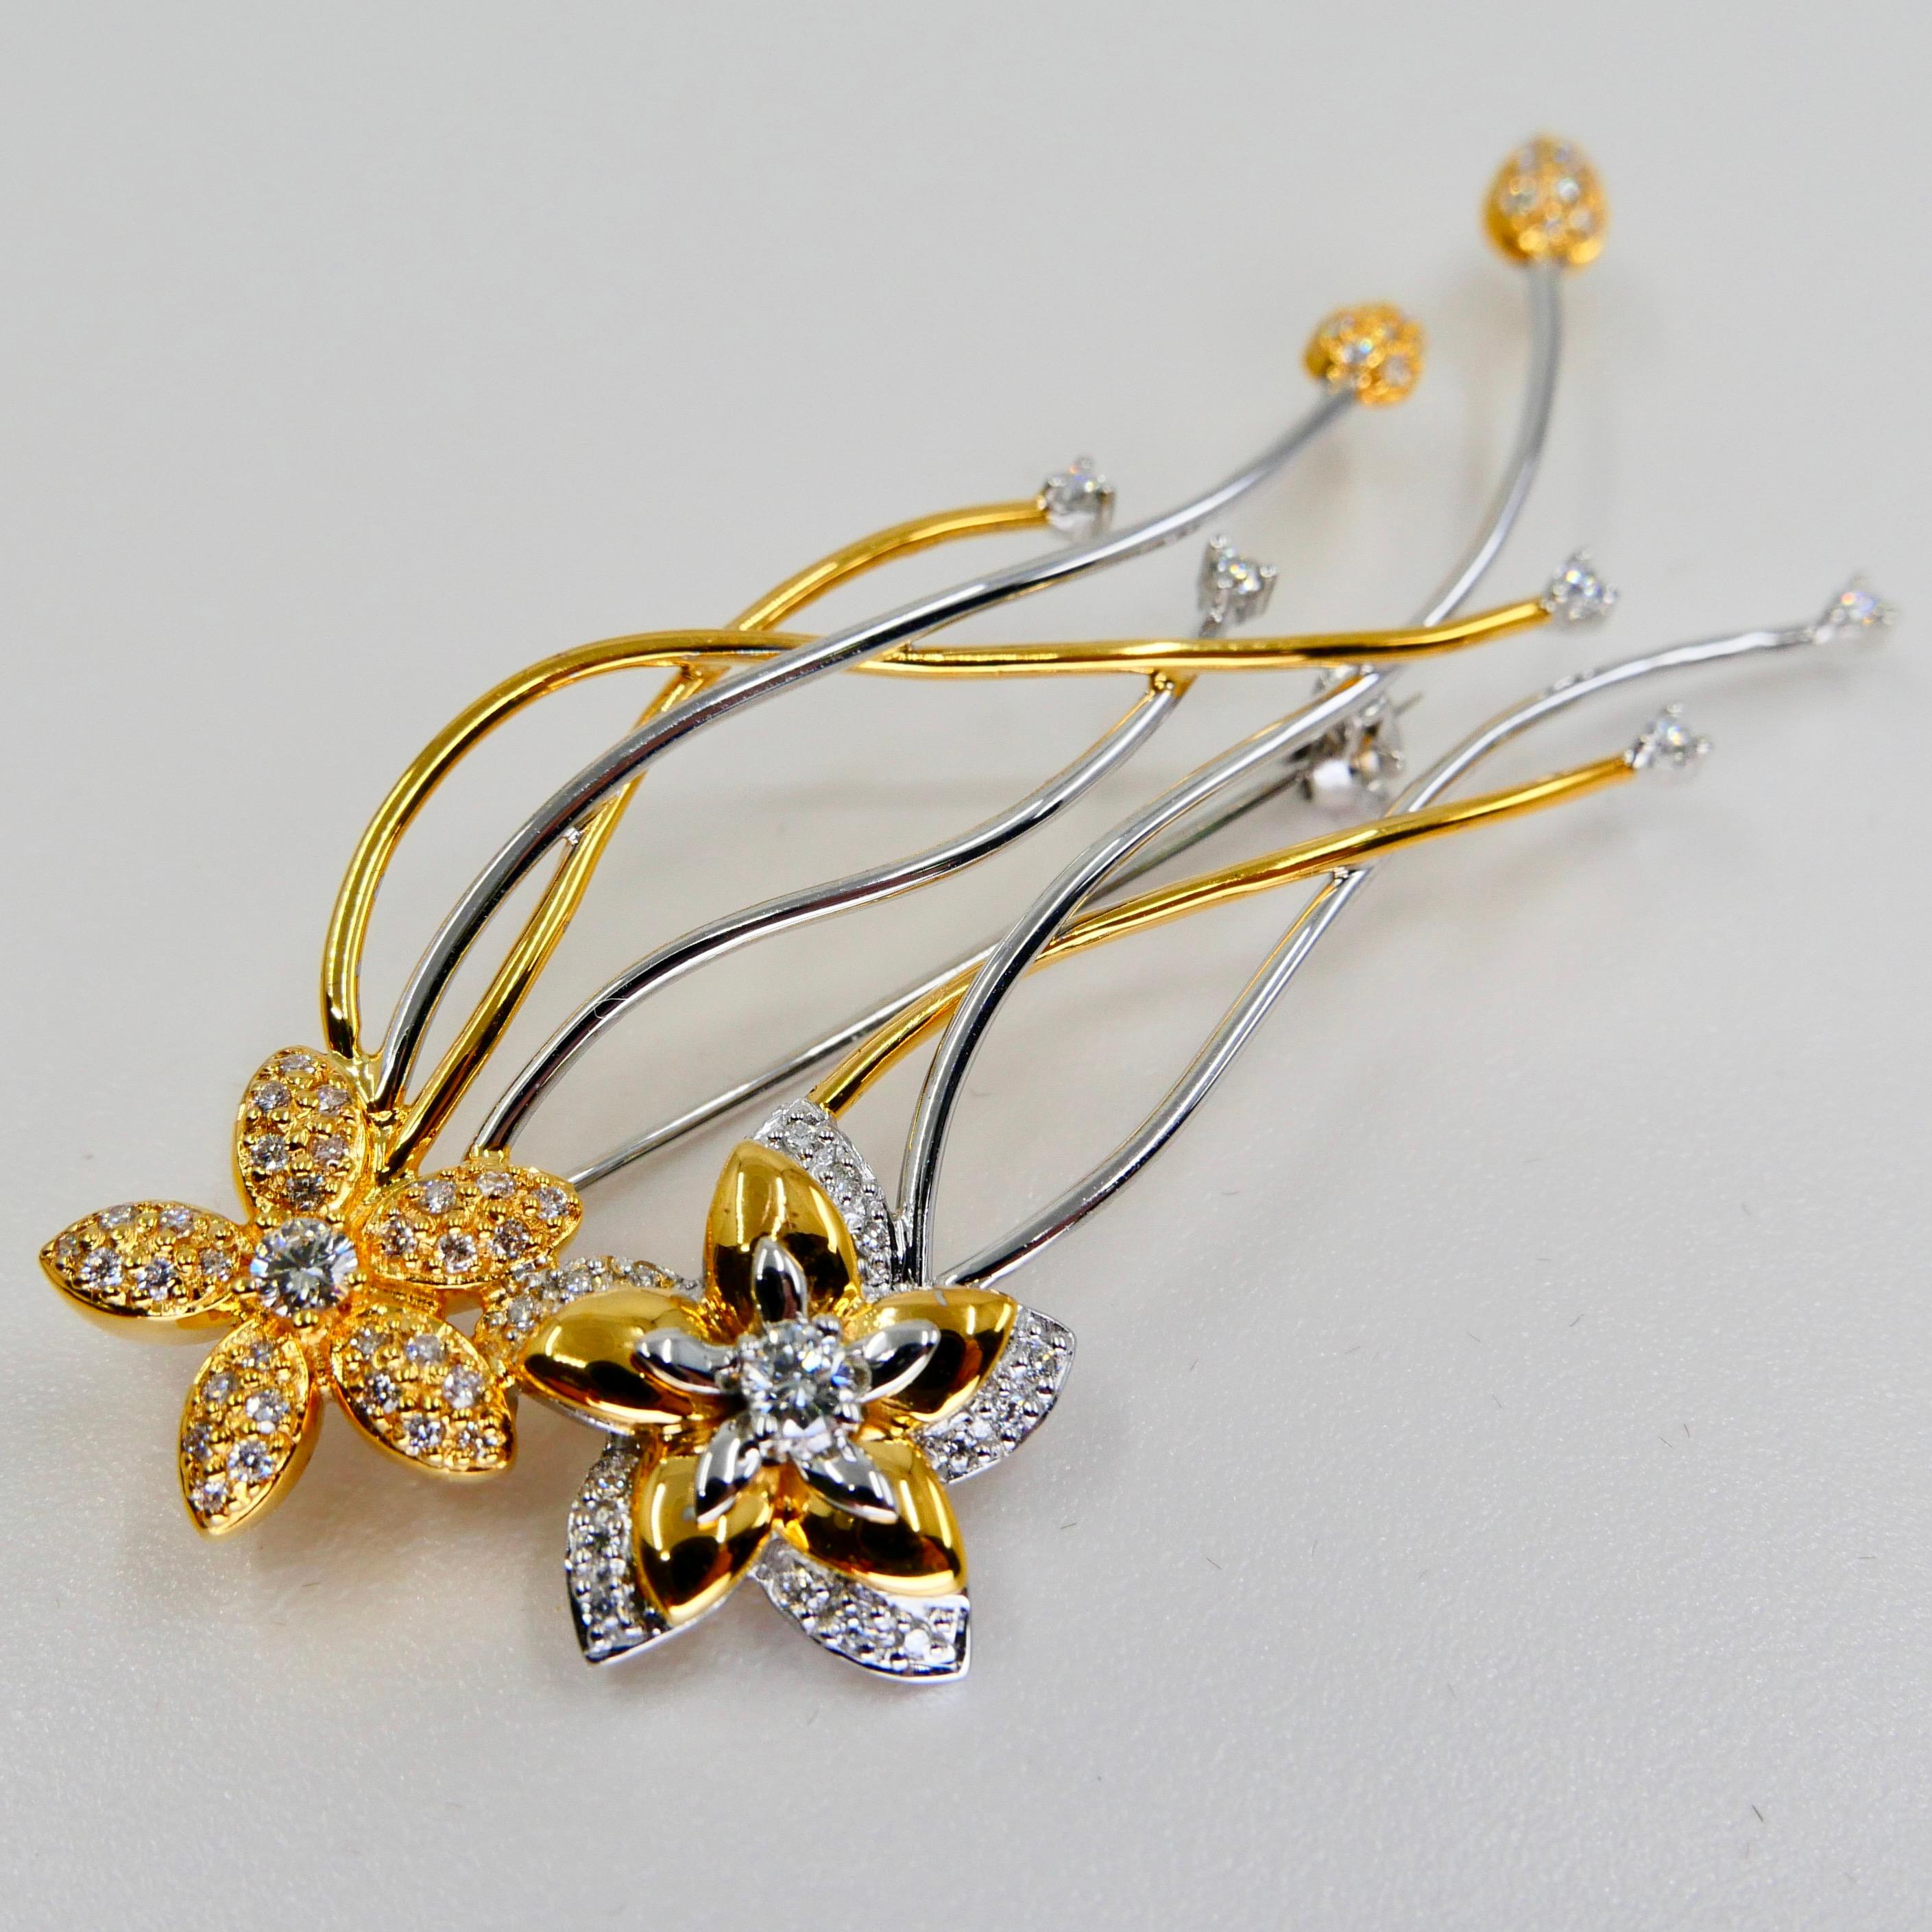 18K Two Tone White & Yellow Gold, Diamond Flower Brooch, Beautiful Workmanship For Sale 5